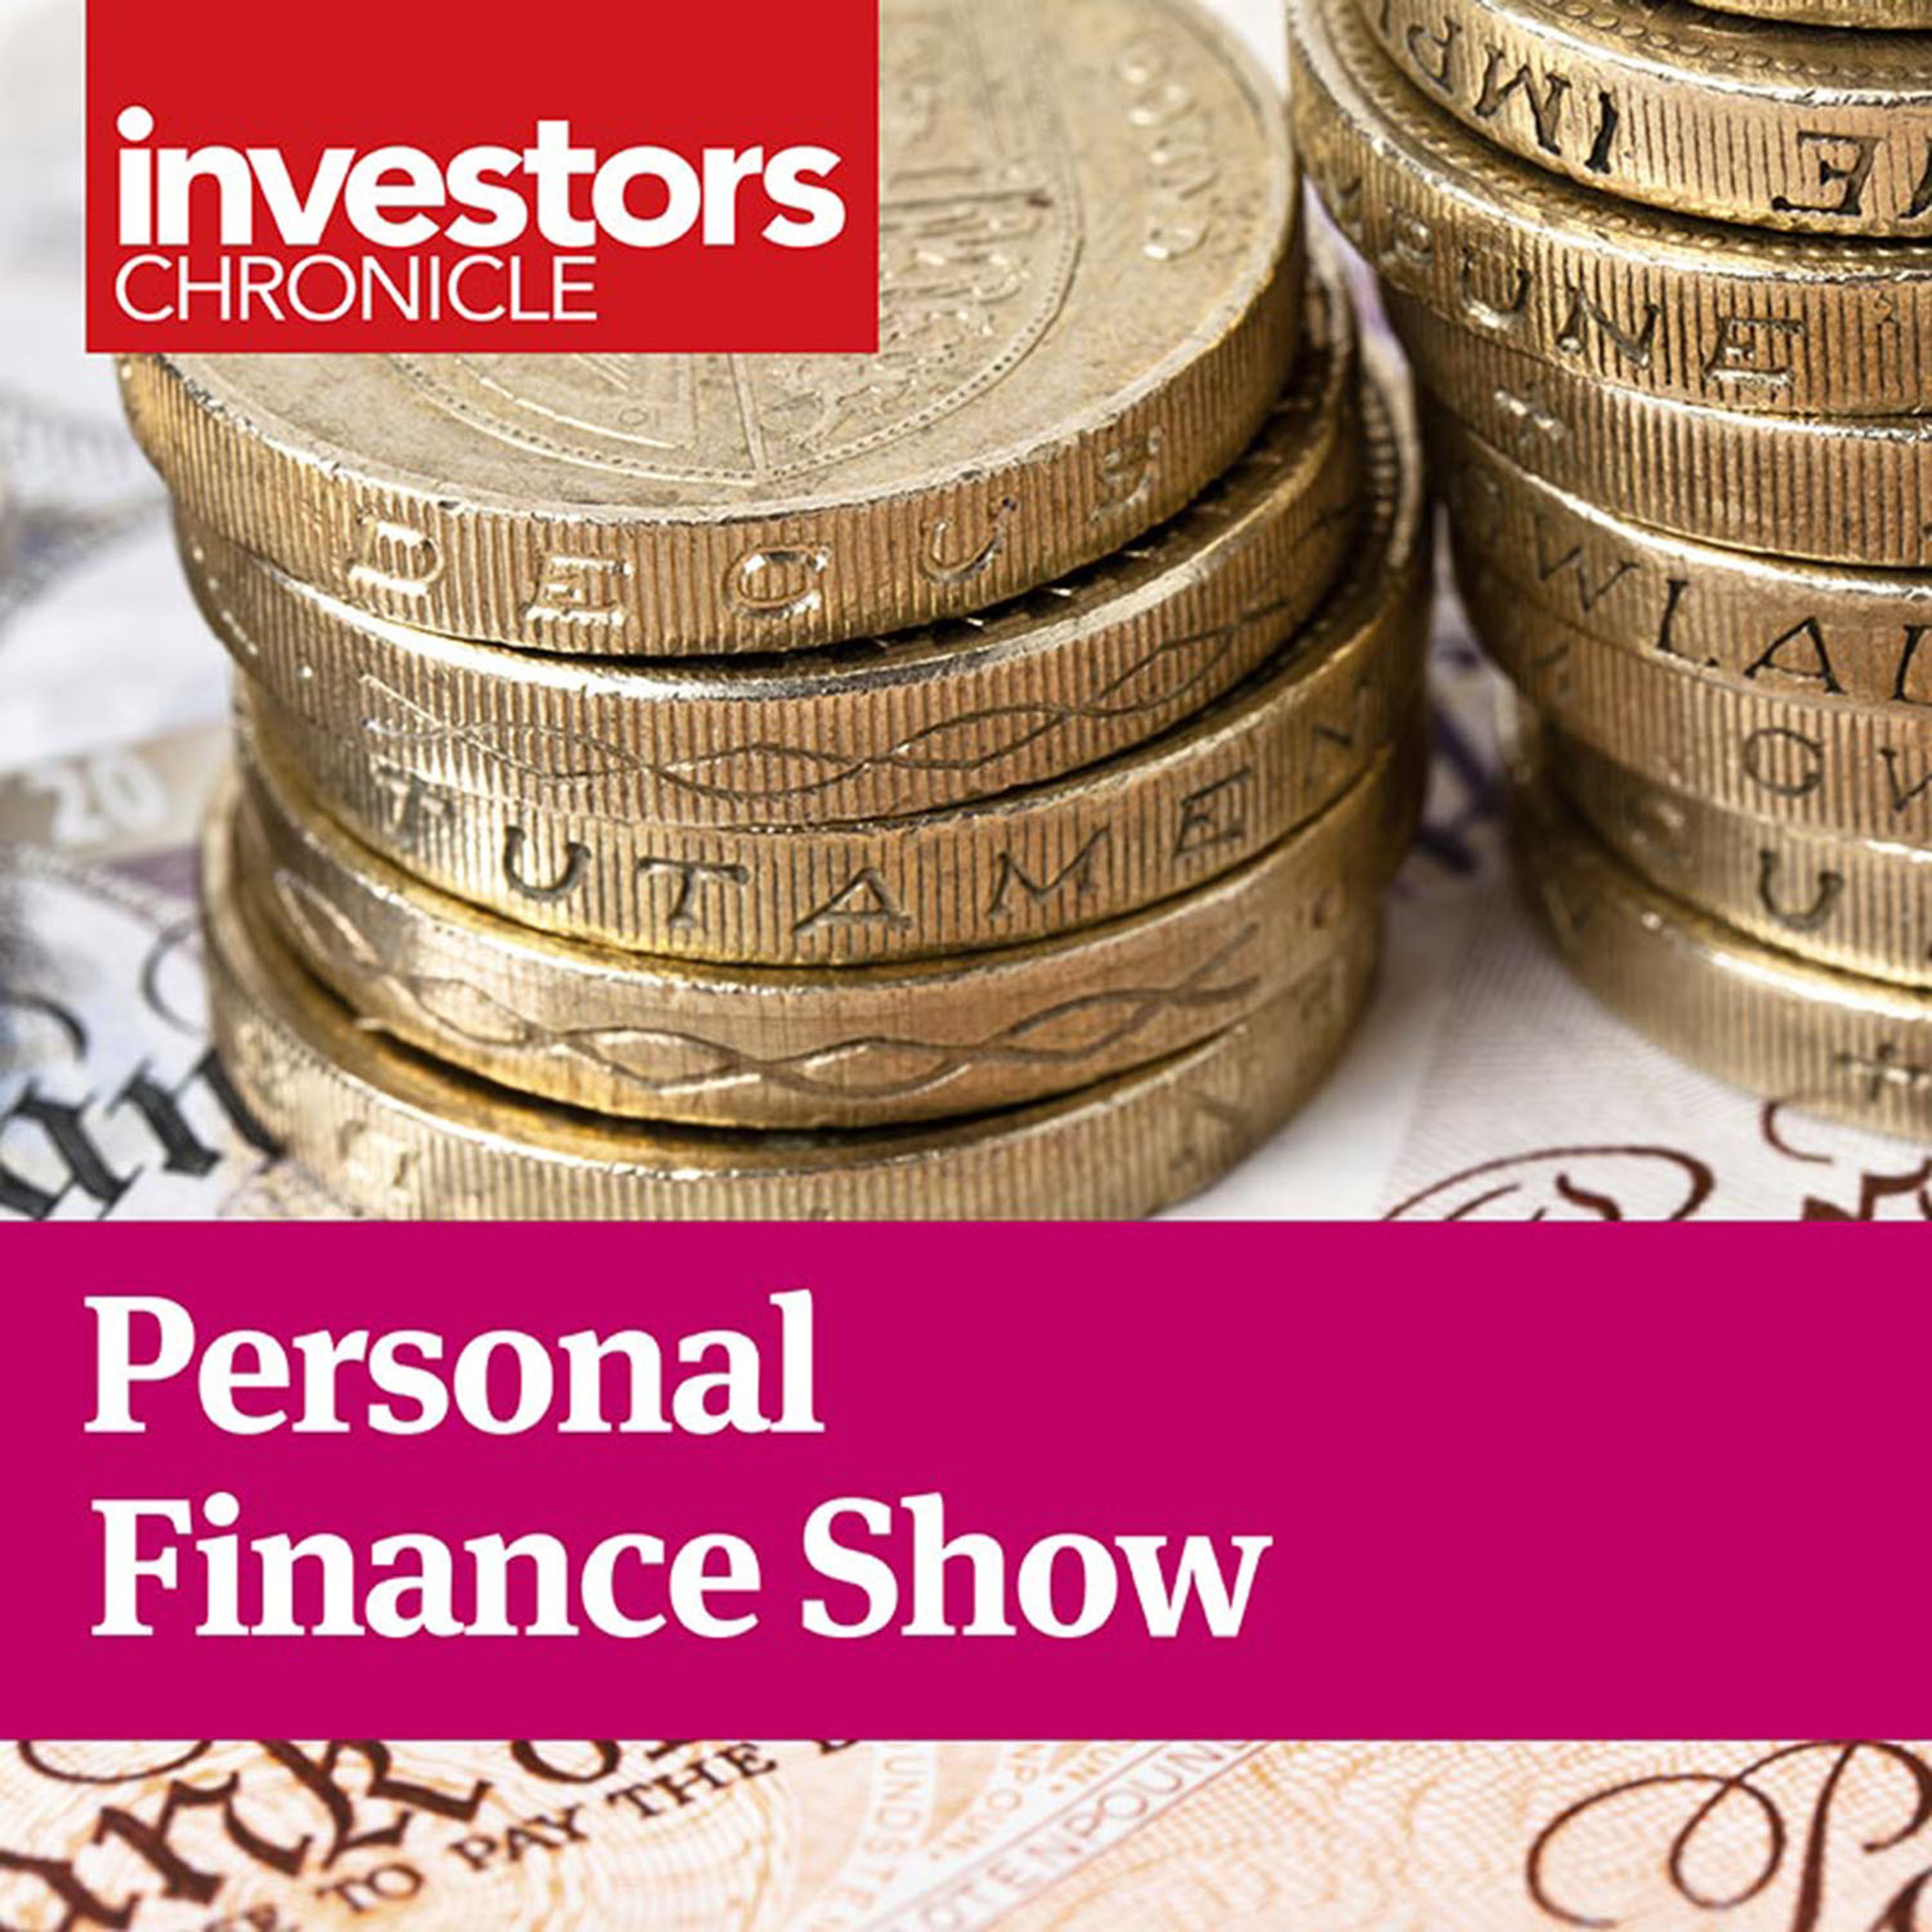 Personal Finance Show: 2019 opportunities and rich sources of income